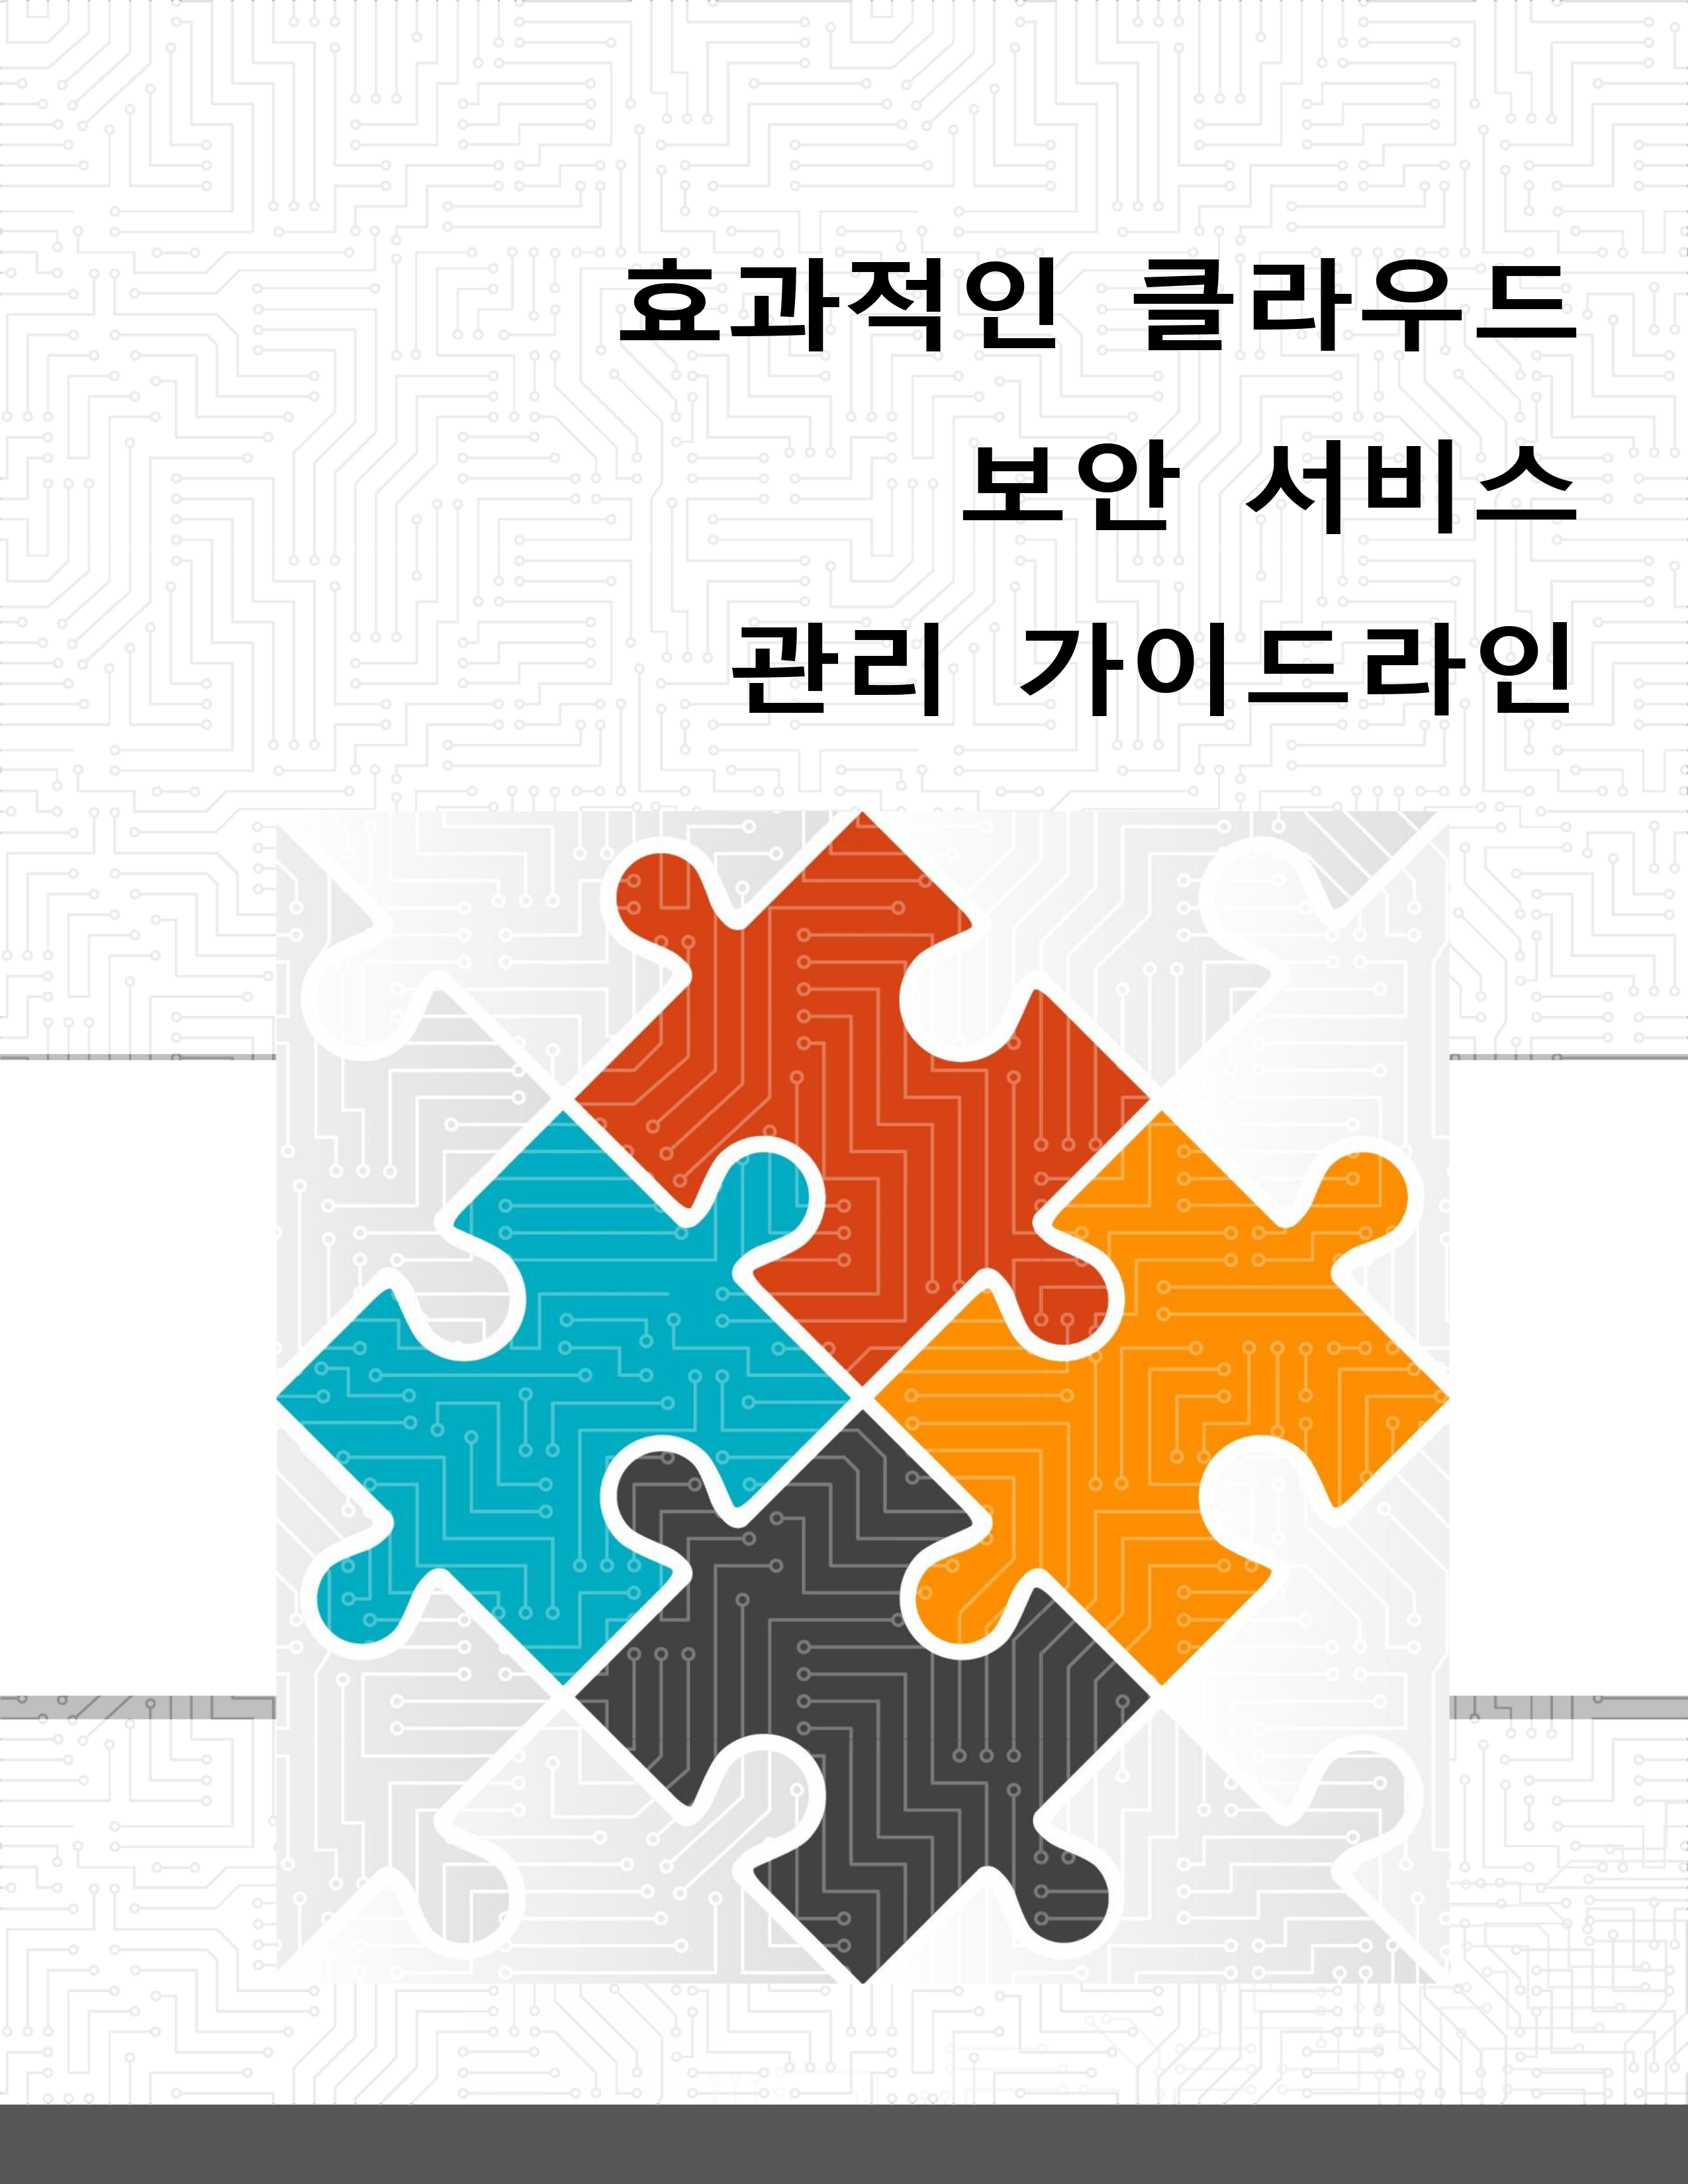 Guideline on Effectively Managing Security Service in the Cloud - Korean Translation